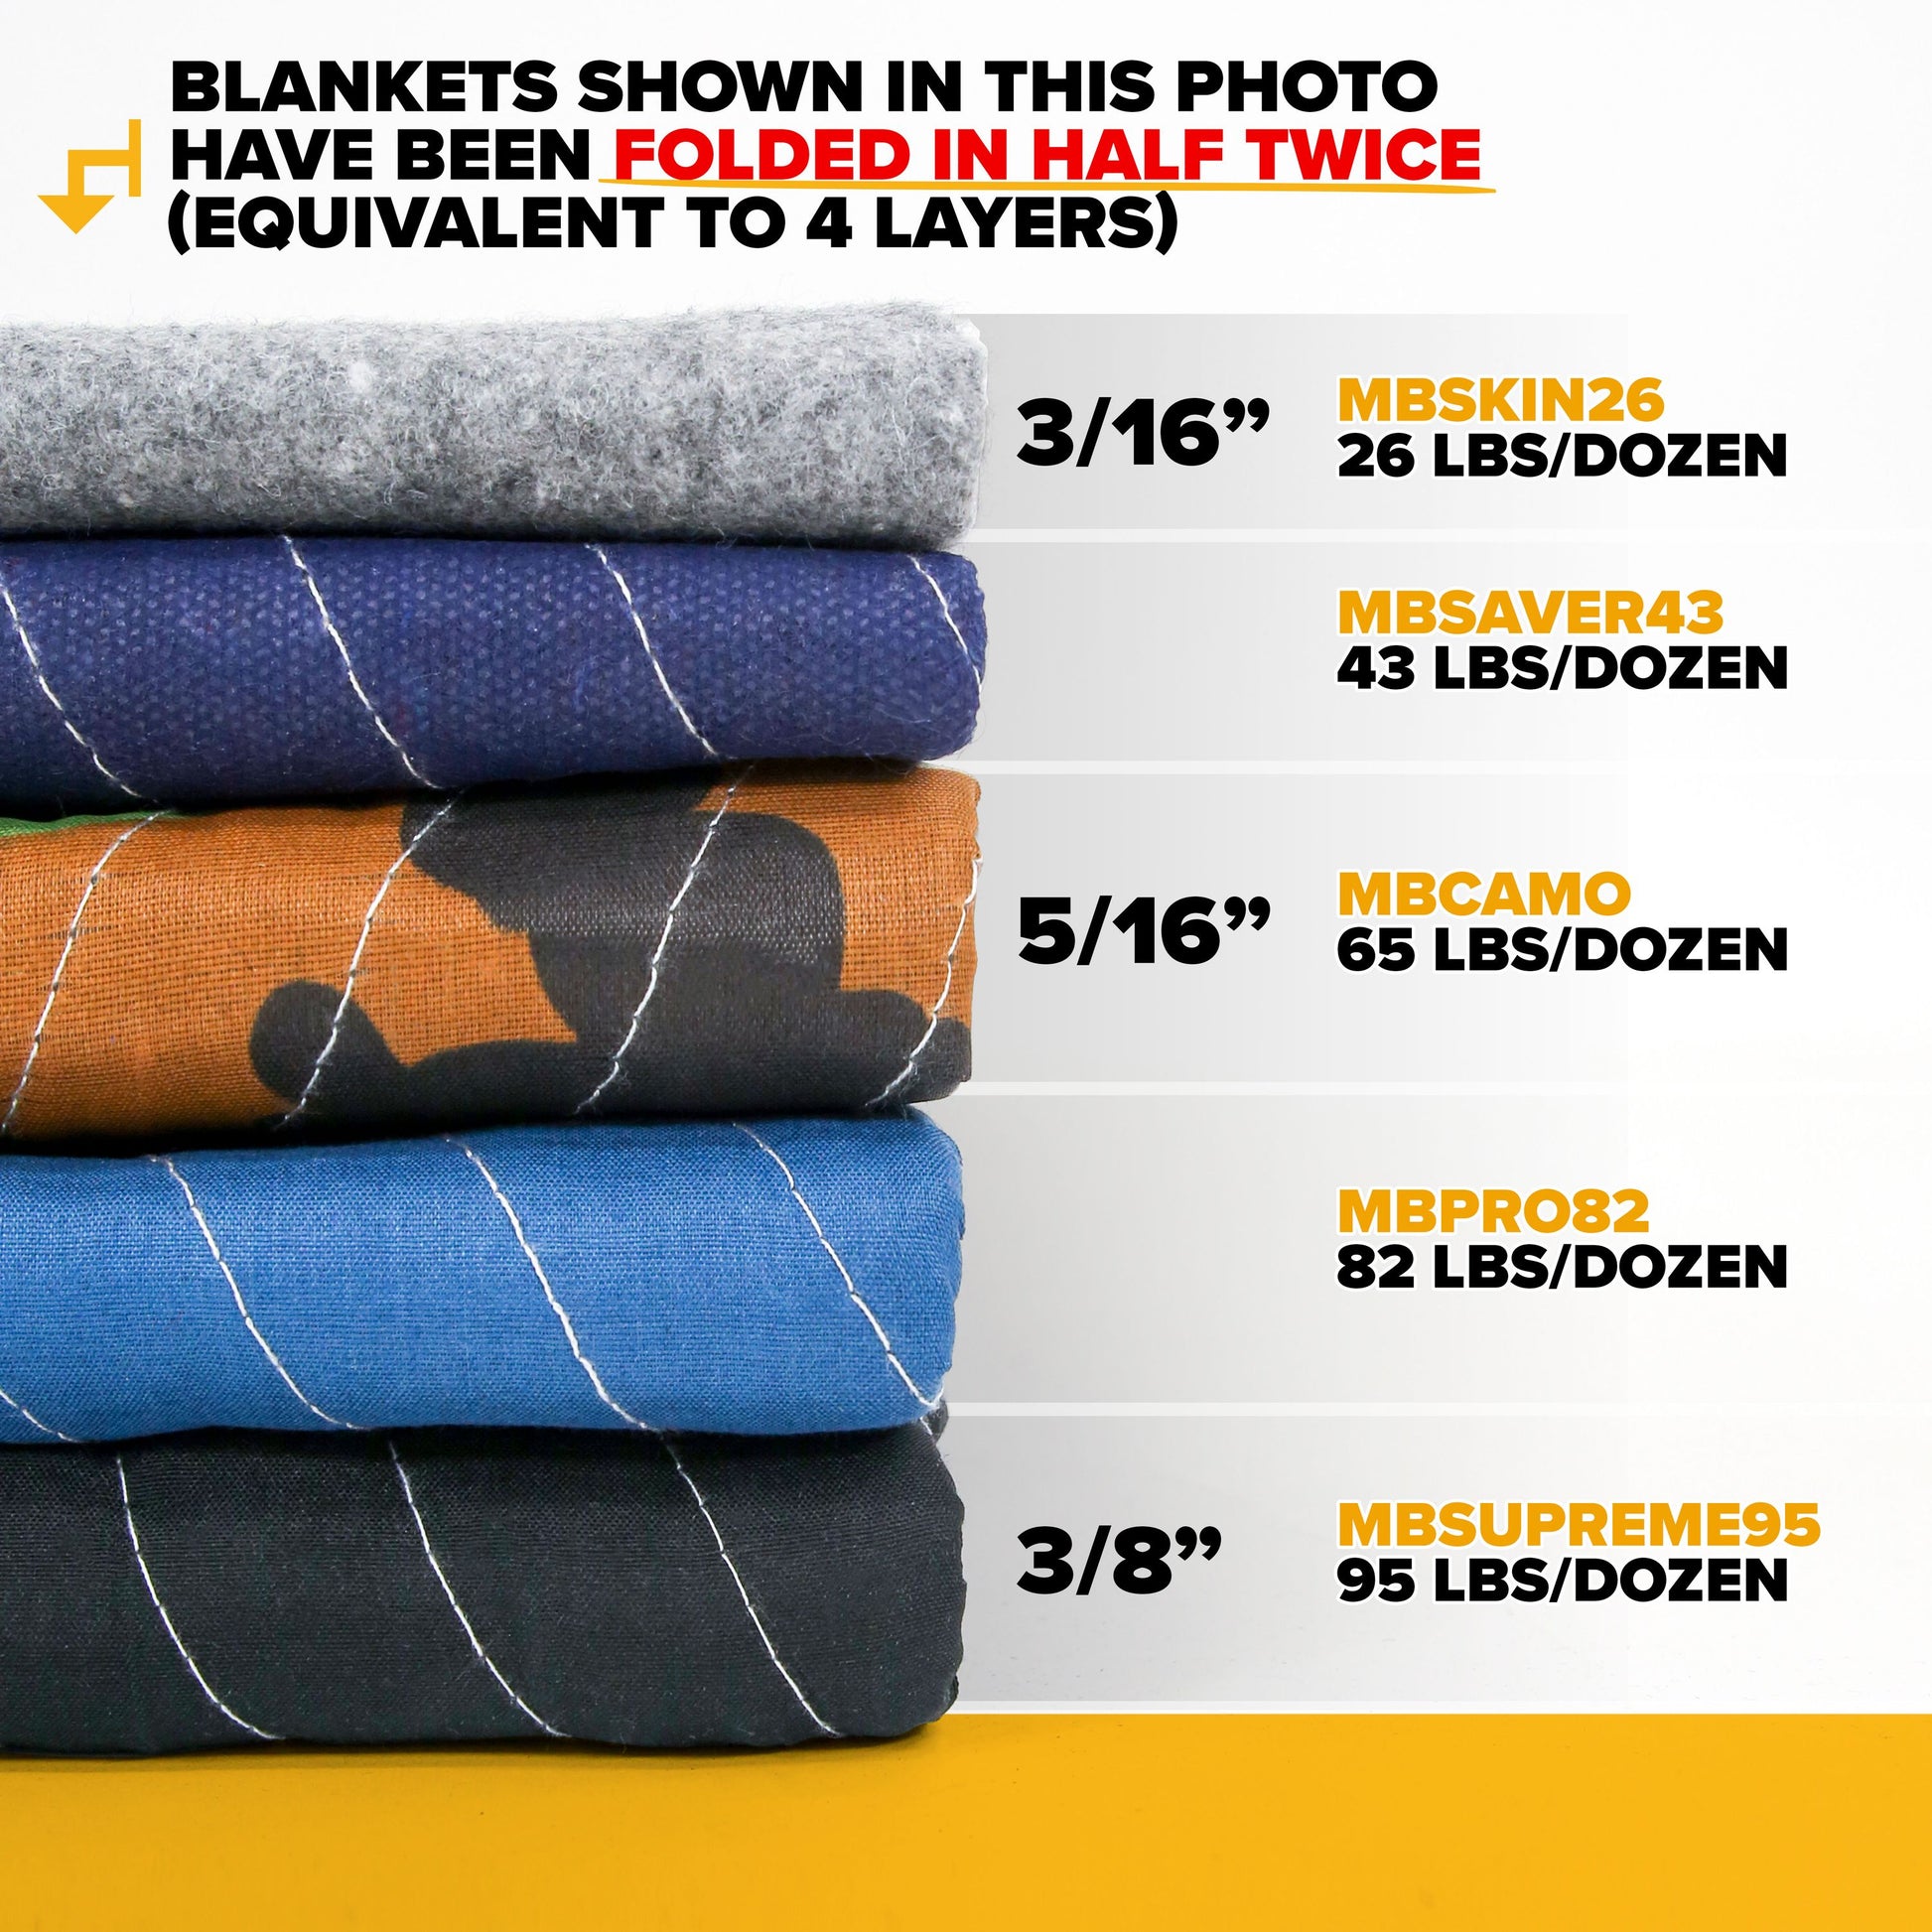 Moving Blankets- Econo Mover 12-Pack, 54 lbs./dozen image 5 of 11